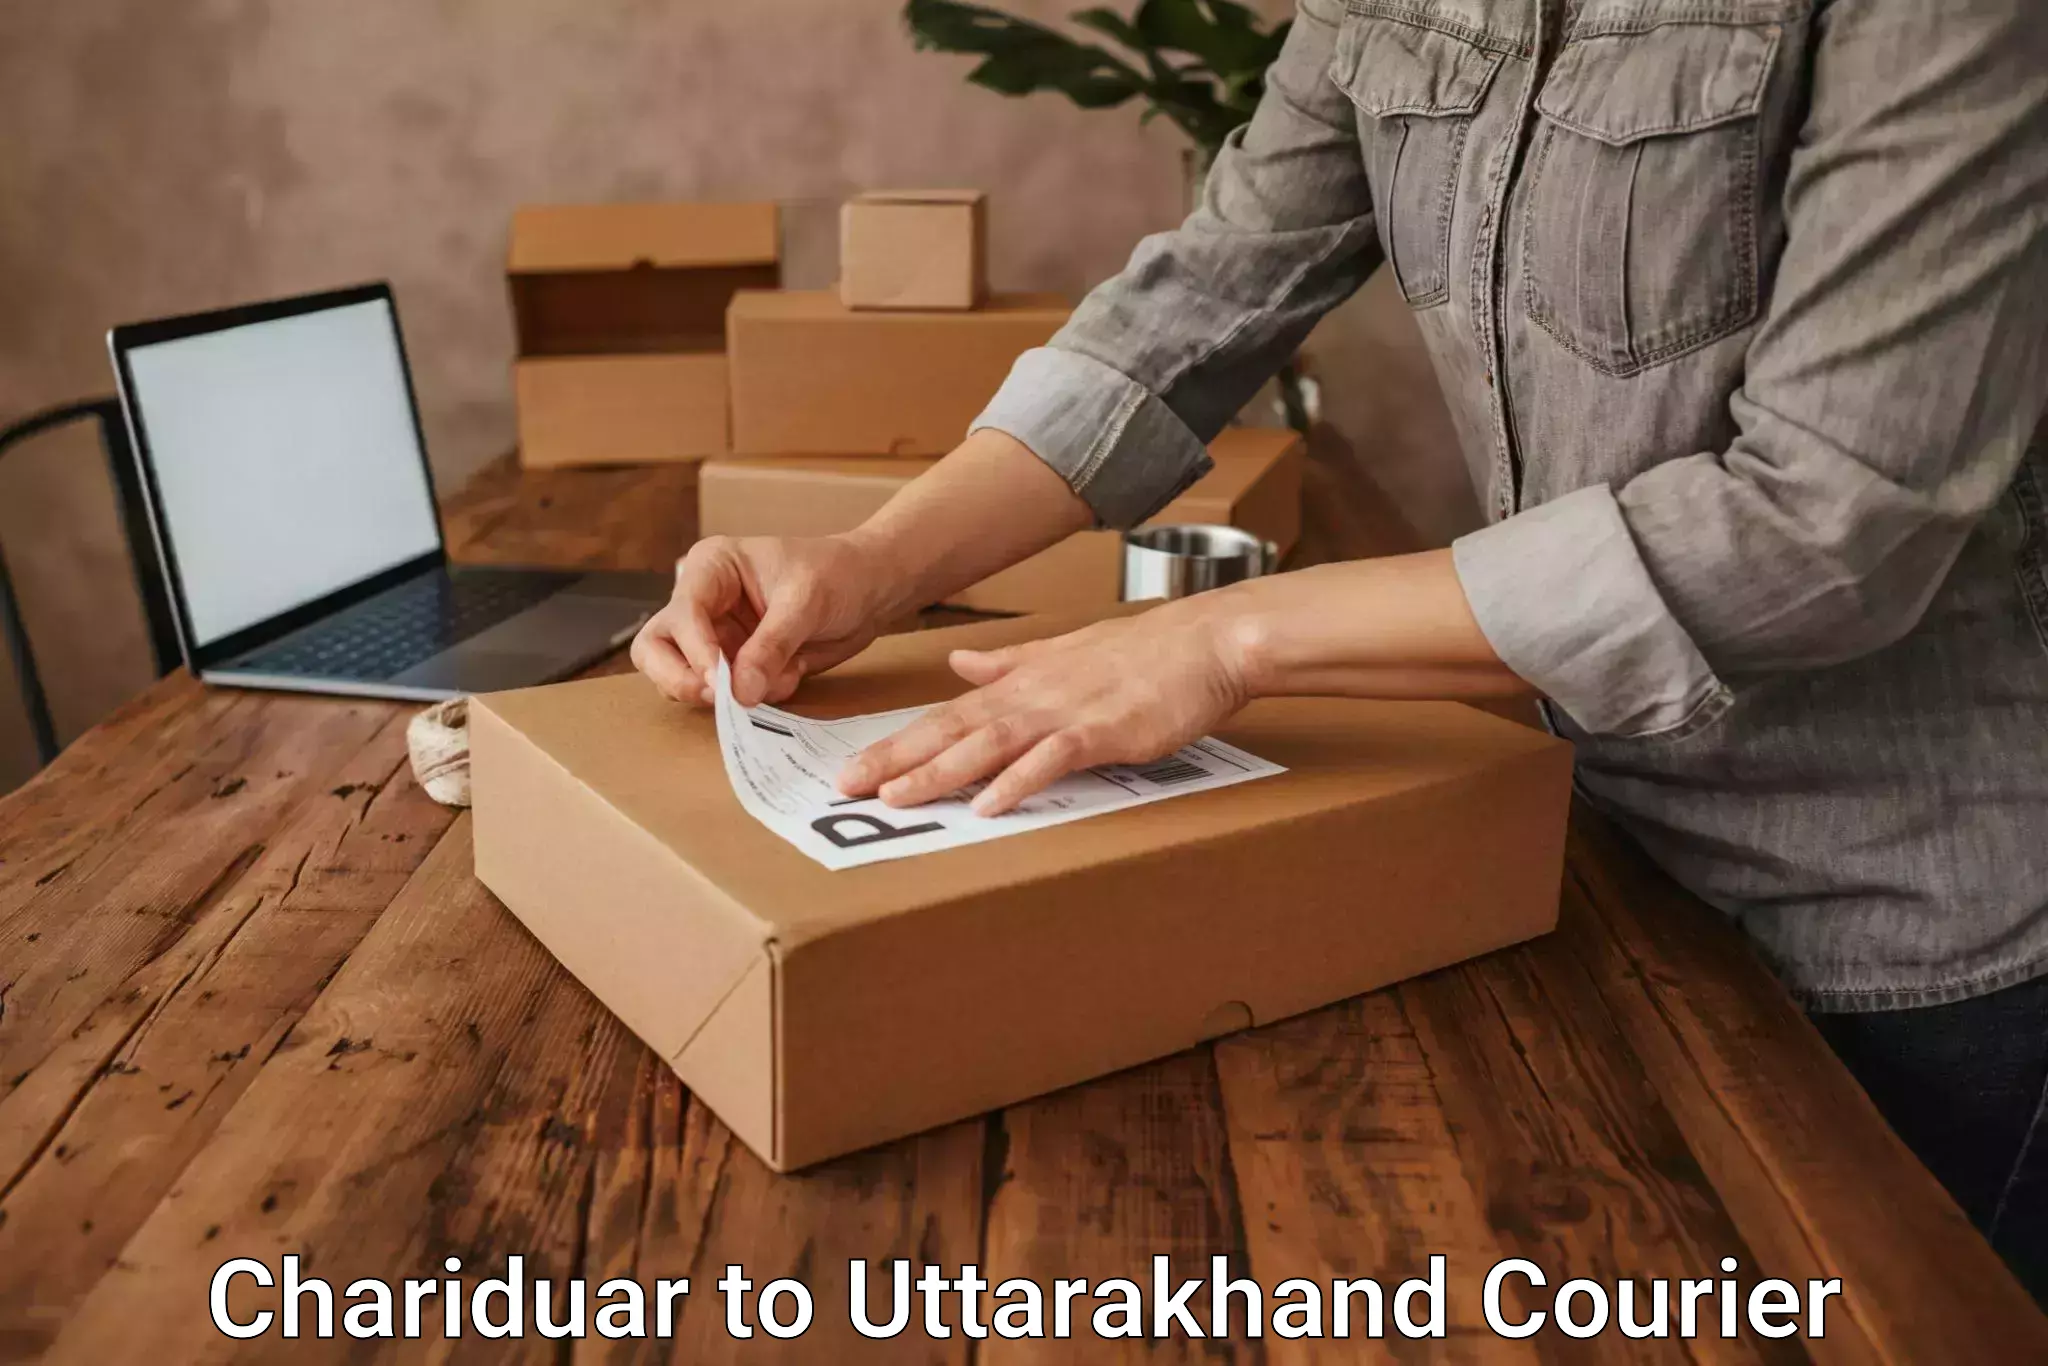 Courier dispatch services Chariduar to Tehri Garhwal